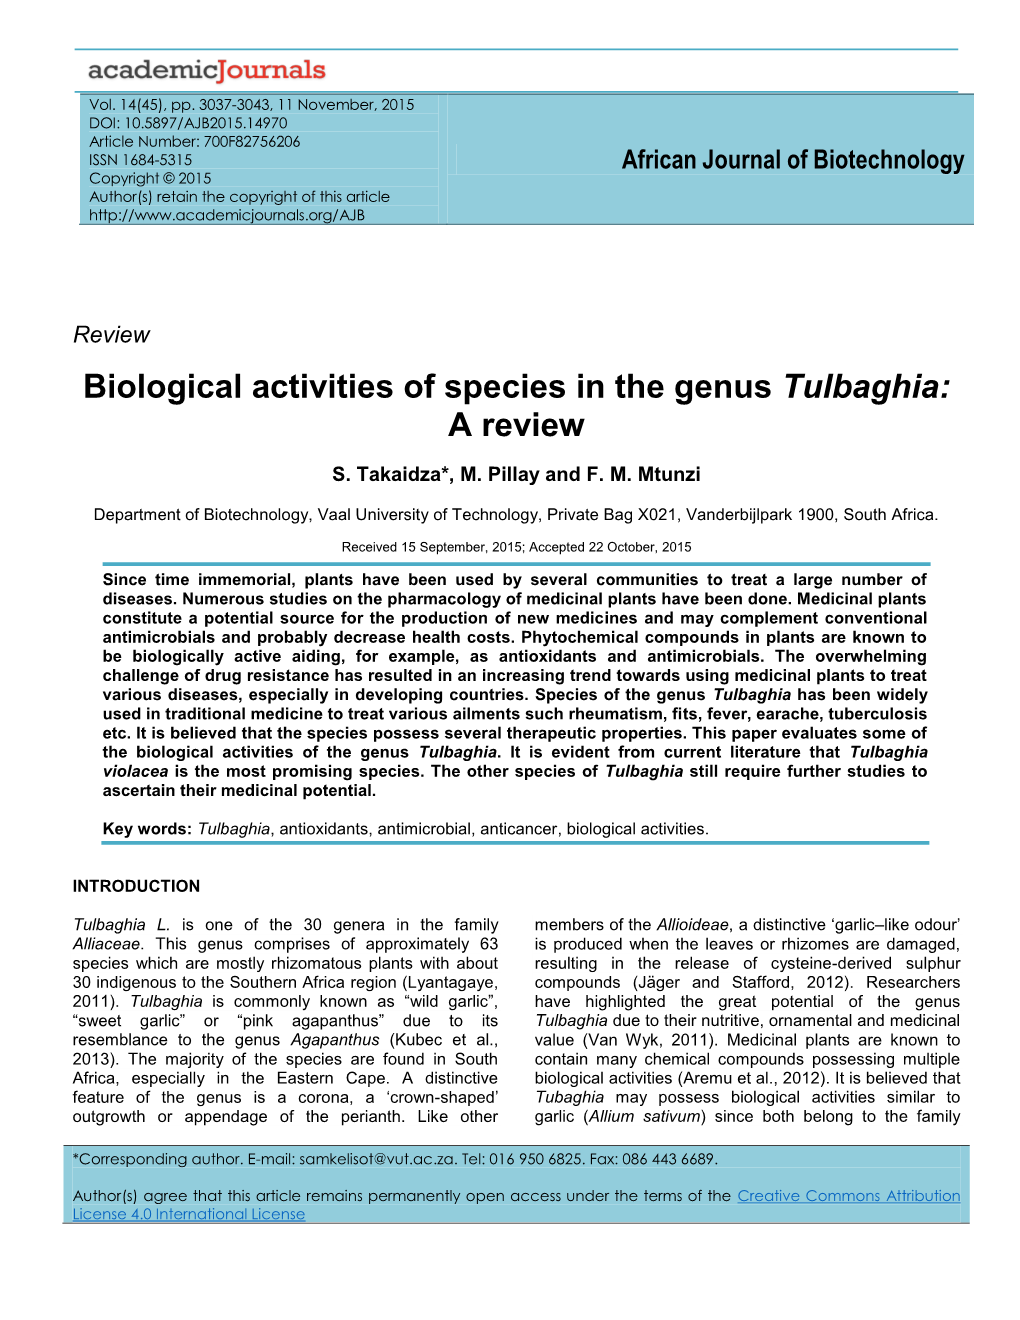 Biological Activities of Species in the Genus Tulbaghia: a Review